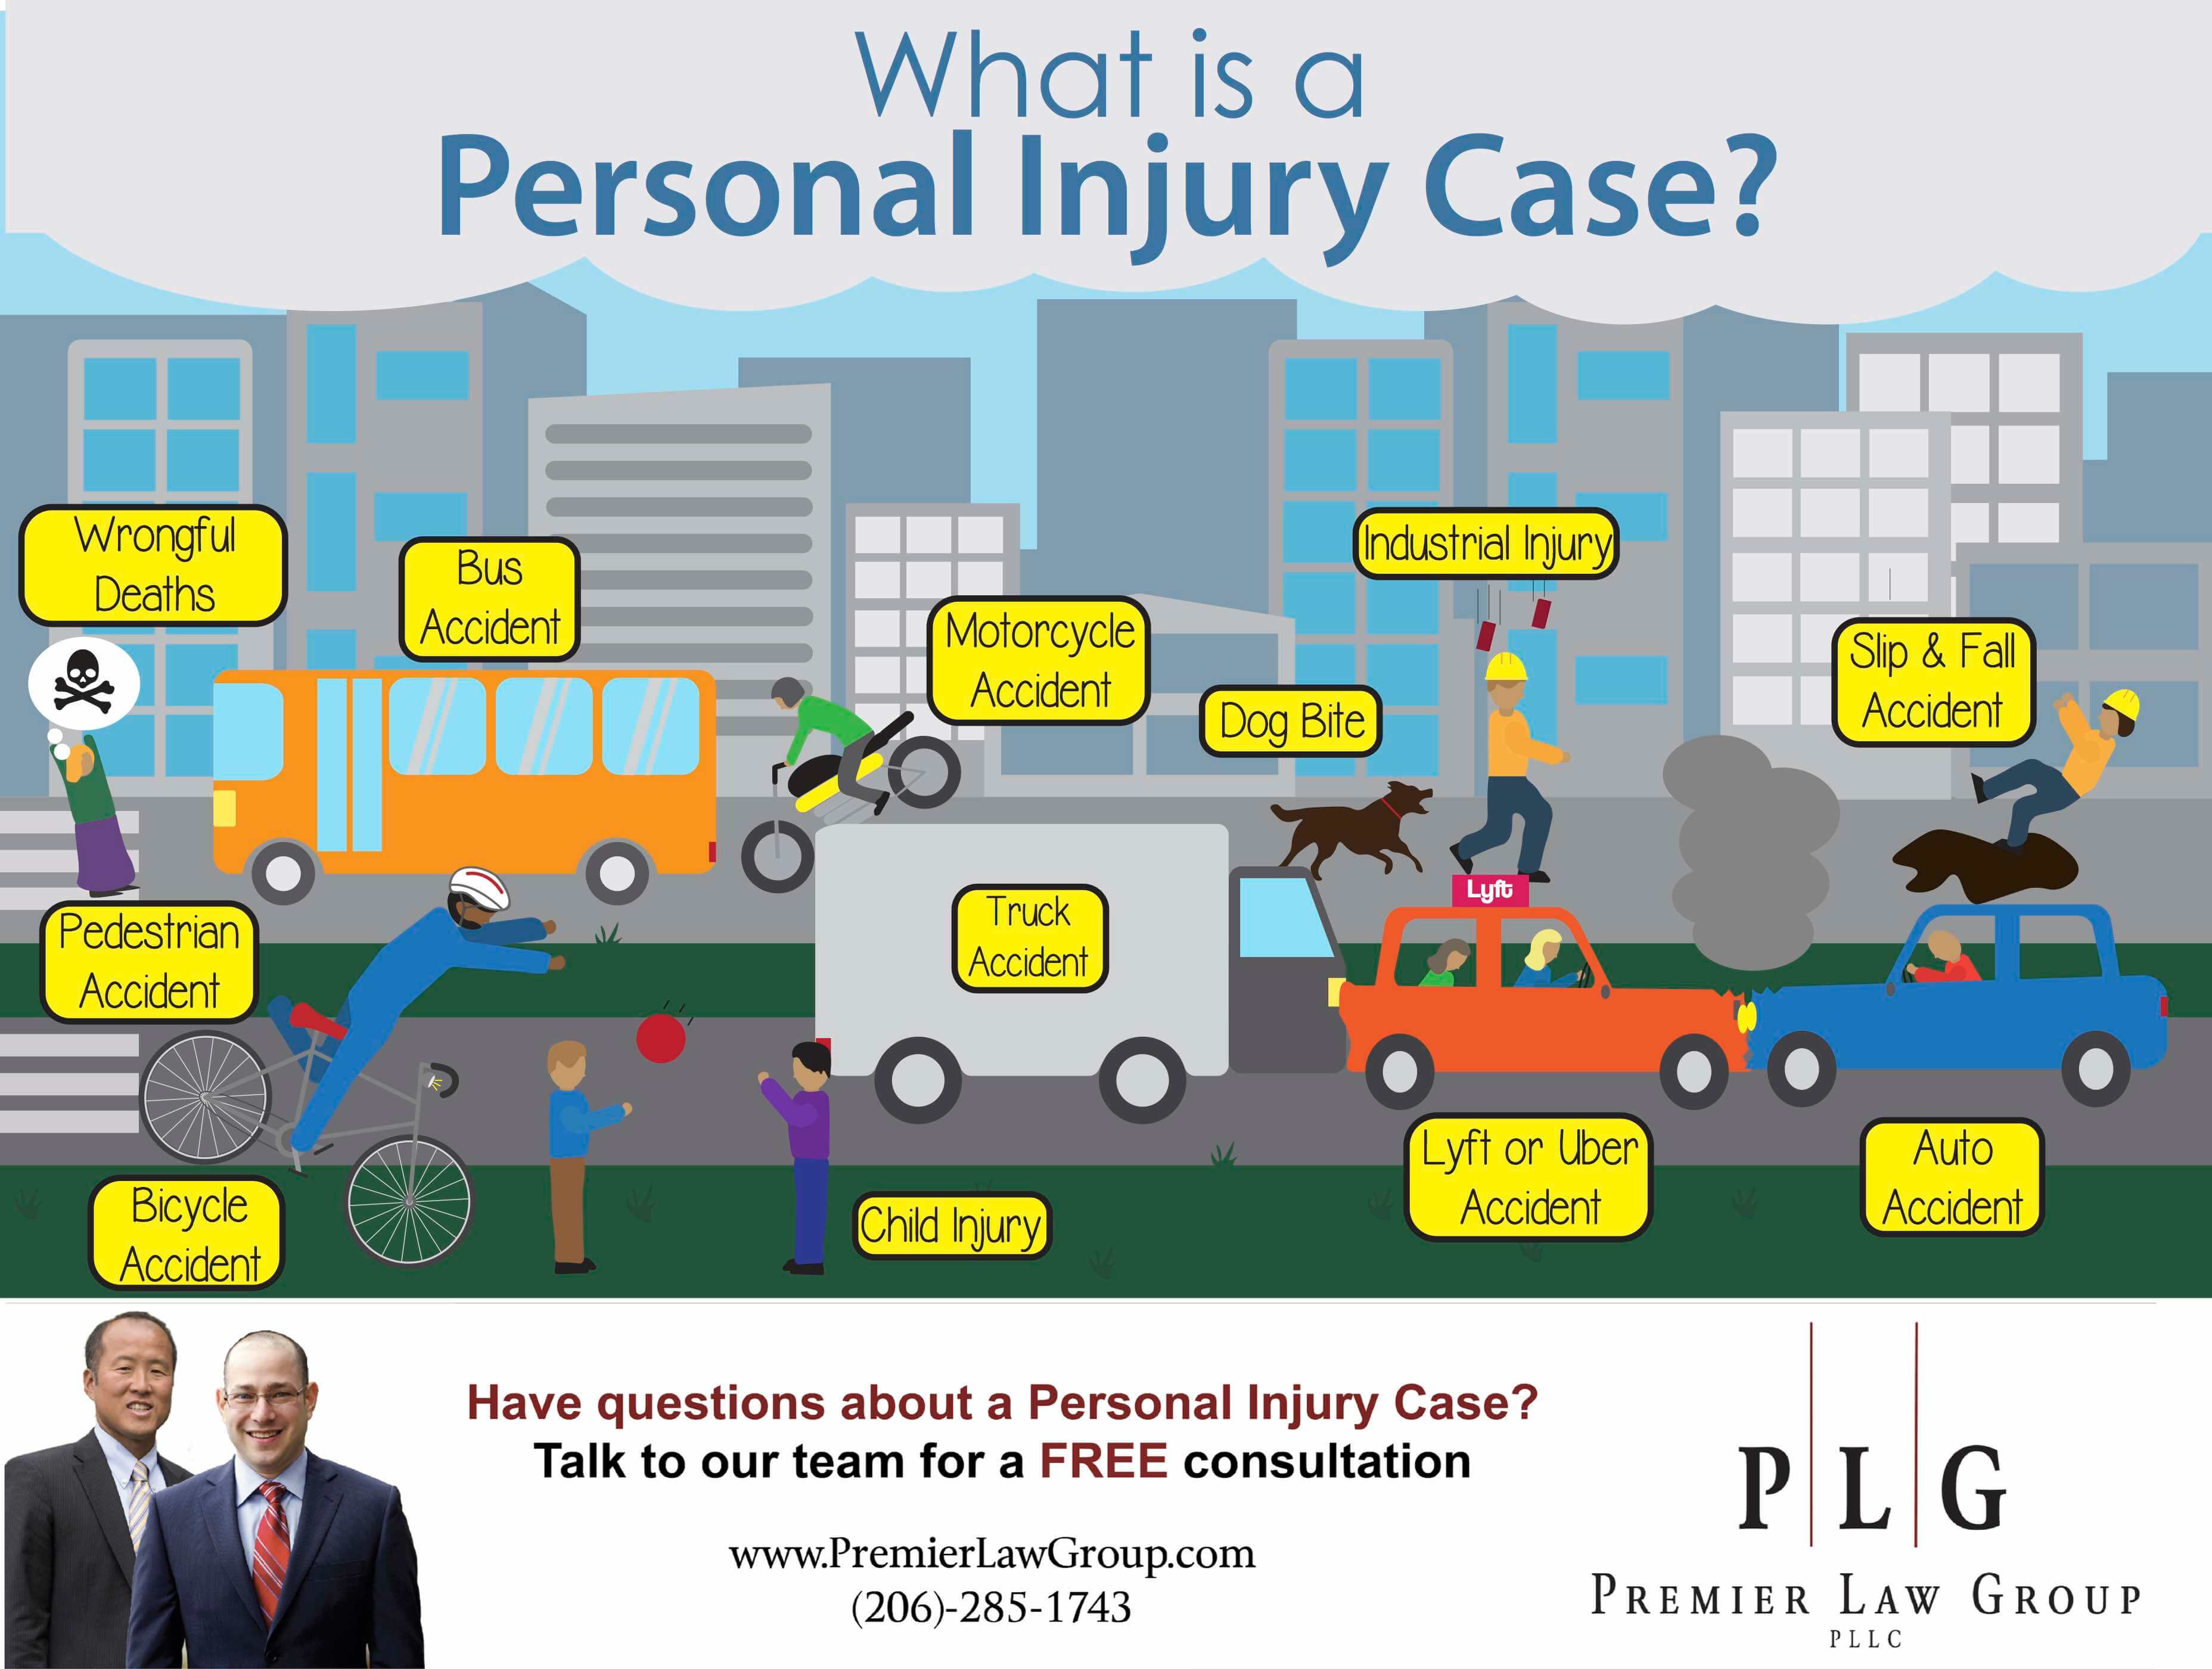 Premier Law Group What Is a Personal Injury Case